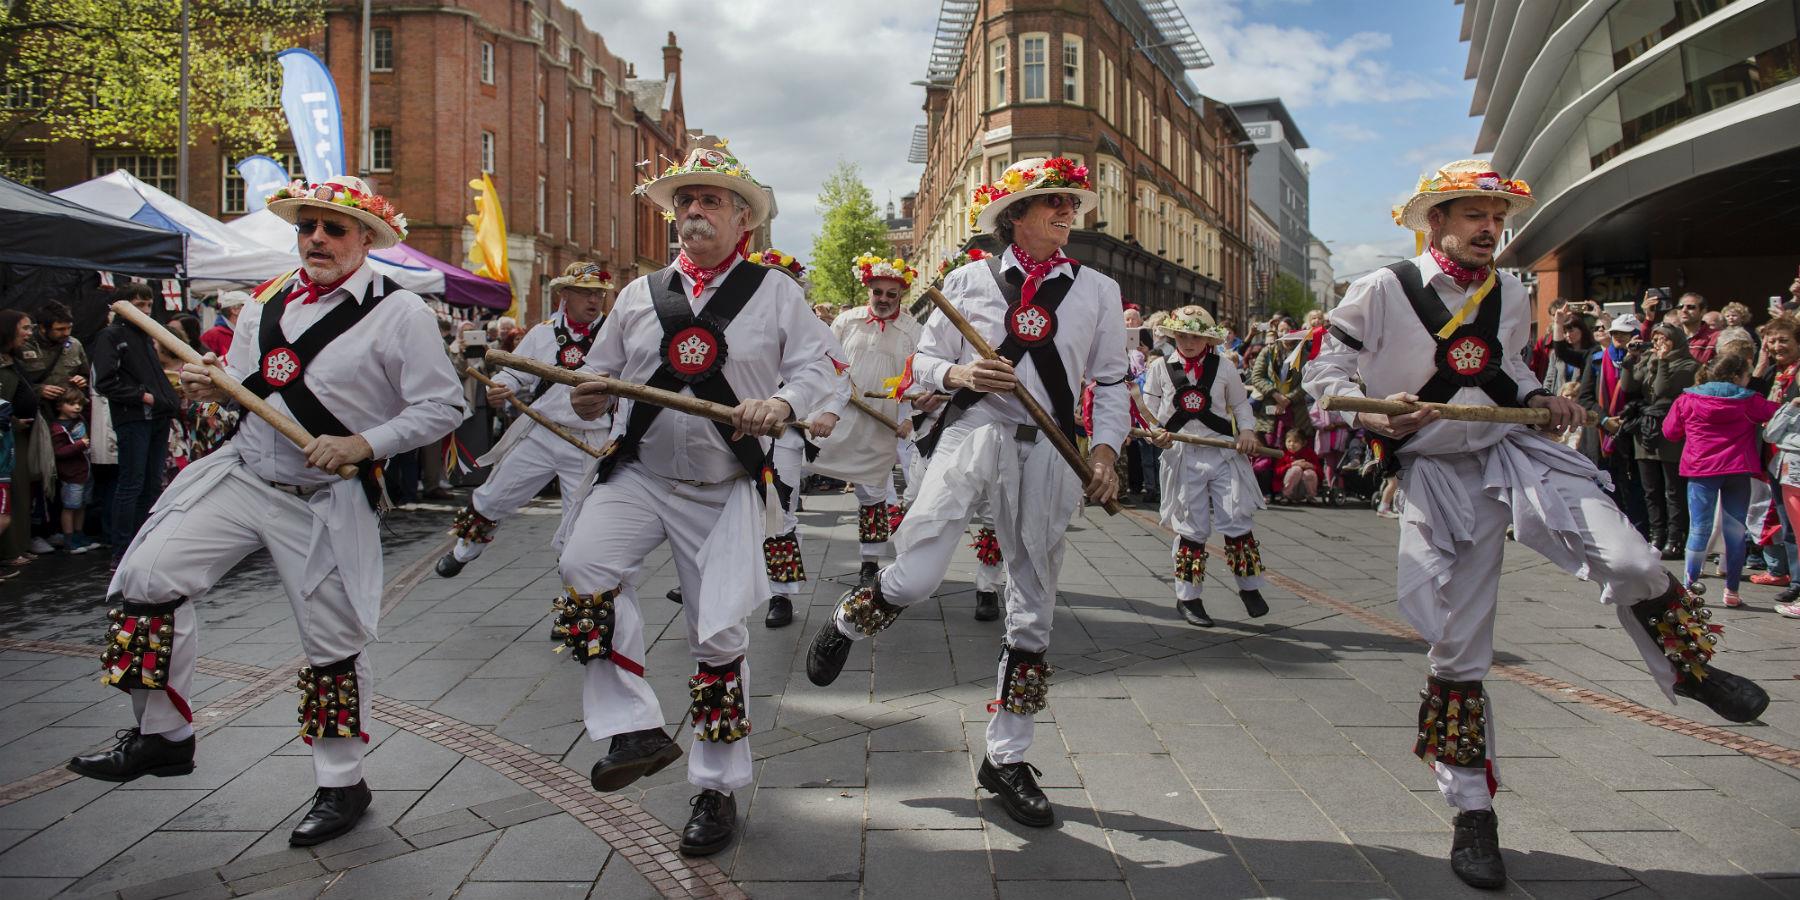 St Festival activities, music and beer COOL AS LEICESTER